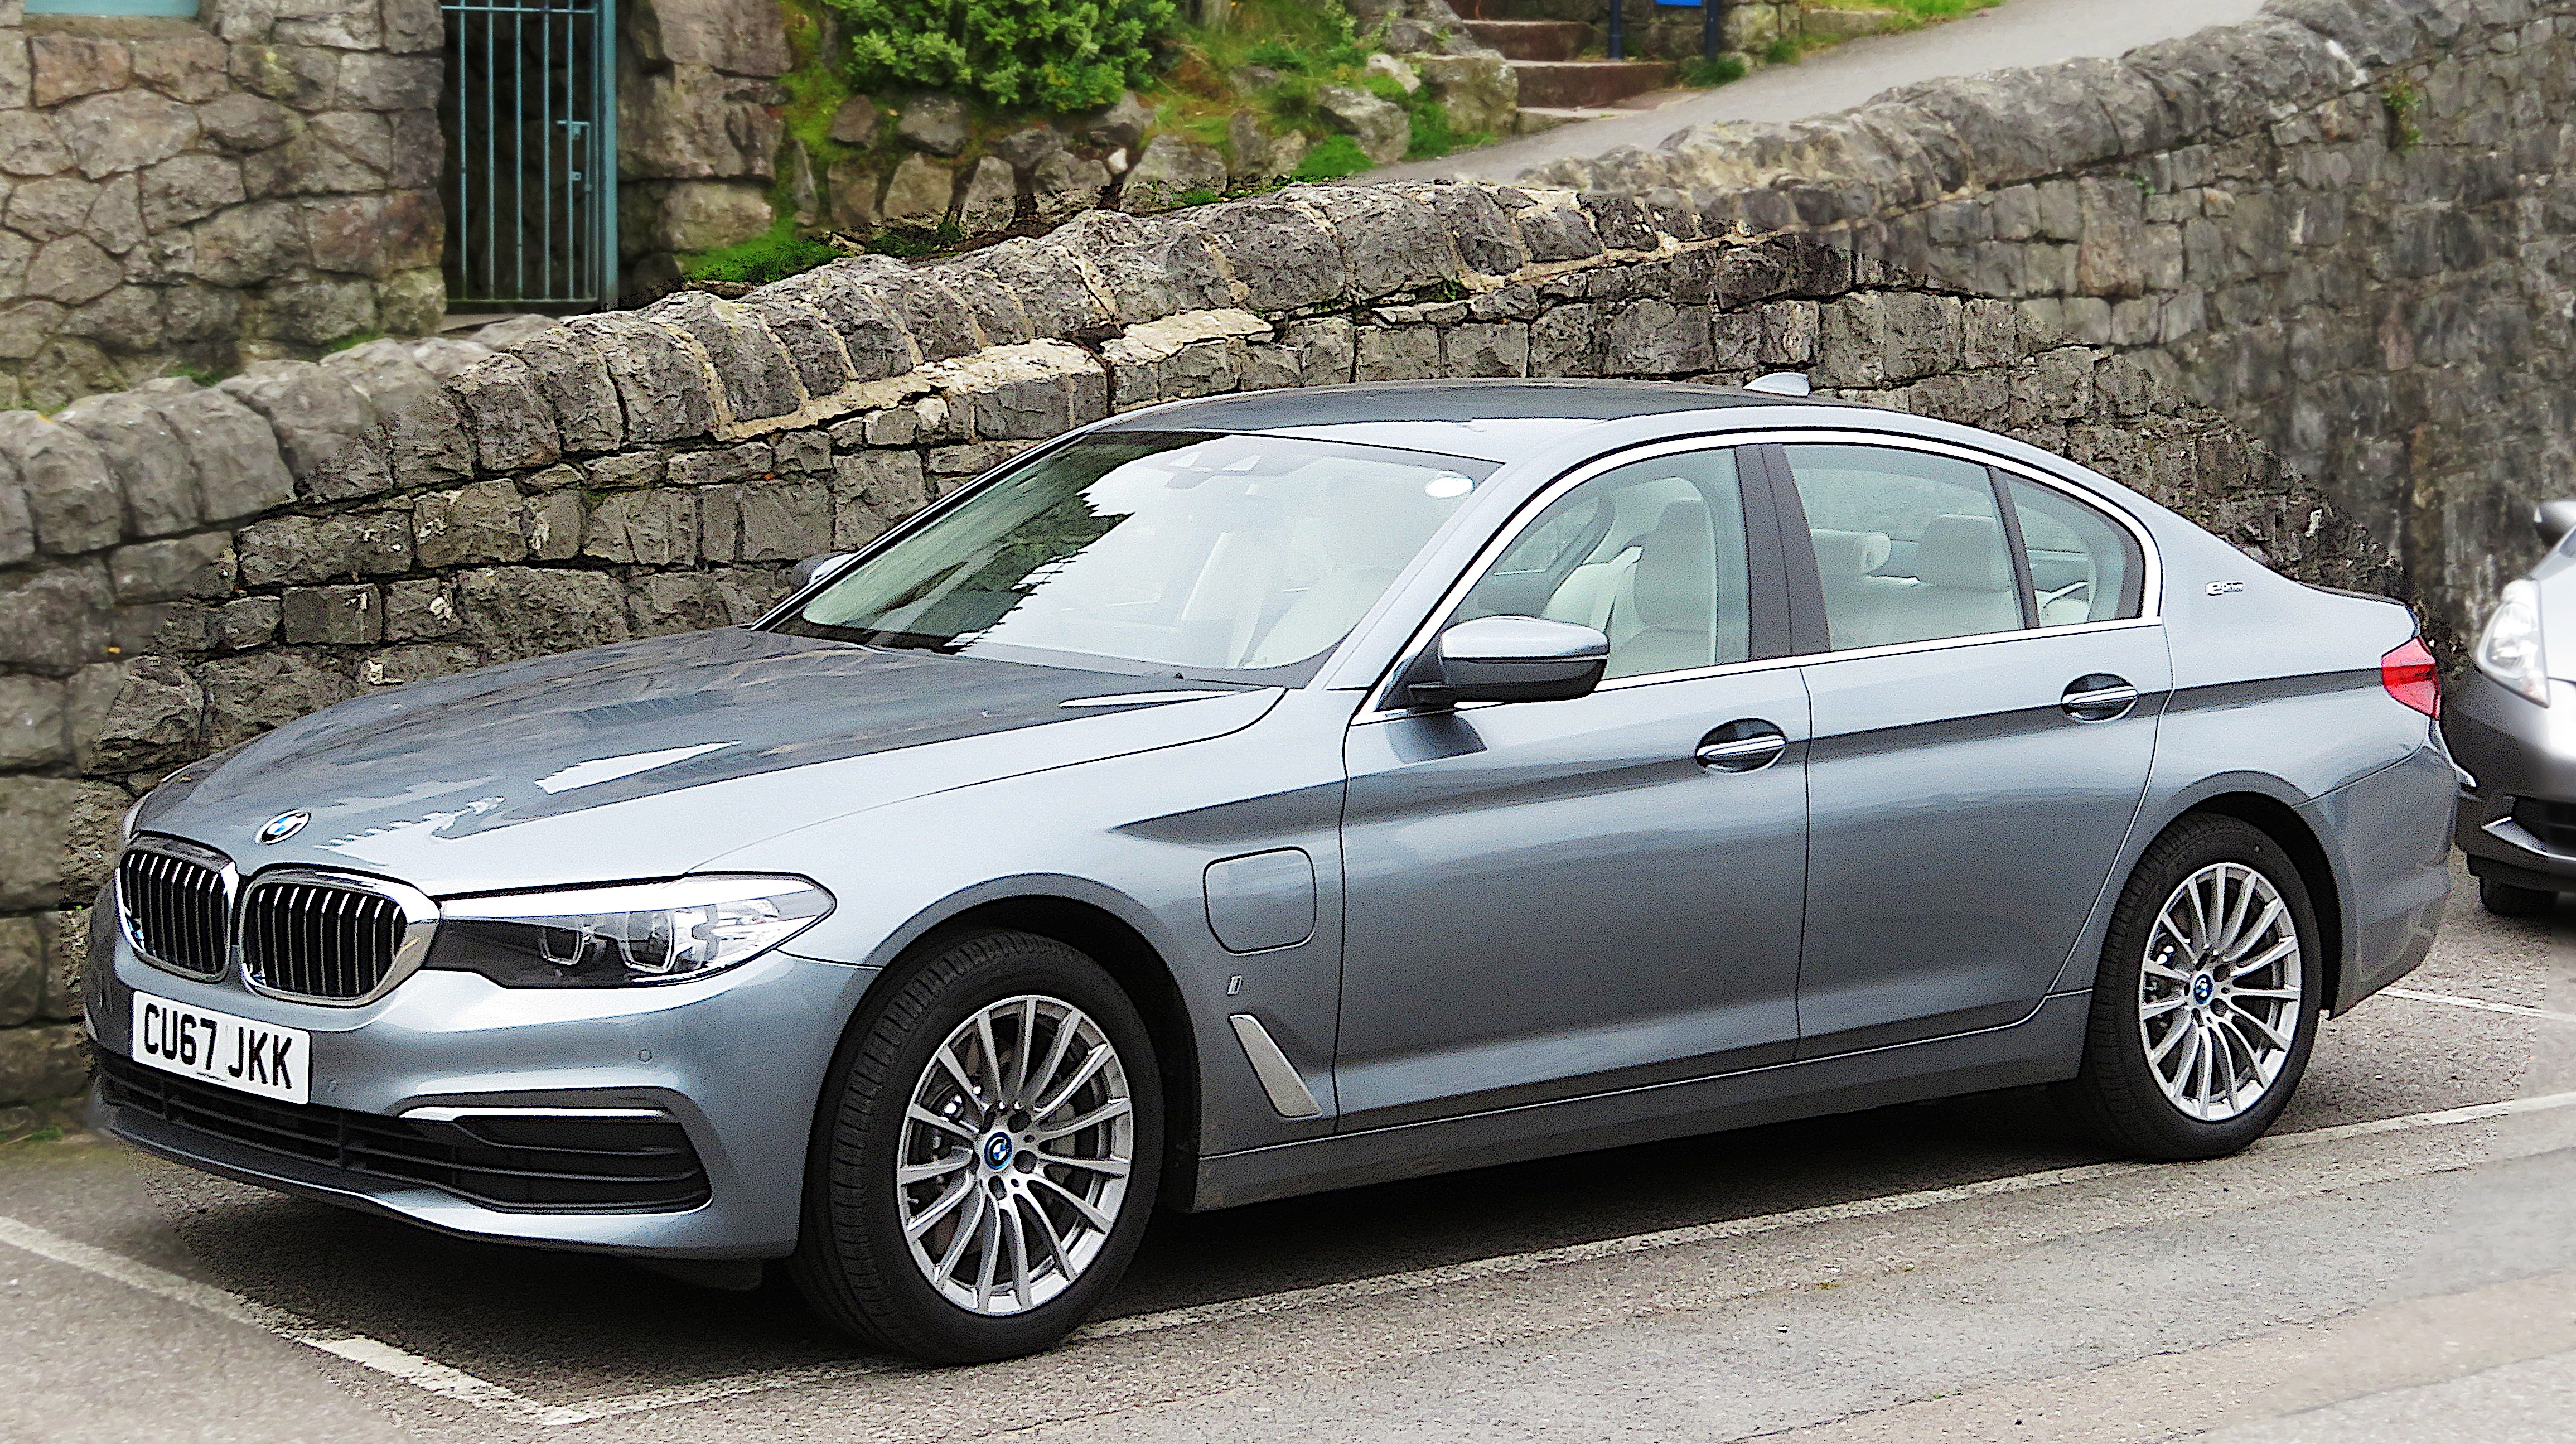 BMW 5 Series iPerformance (G30) exterior restyling